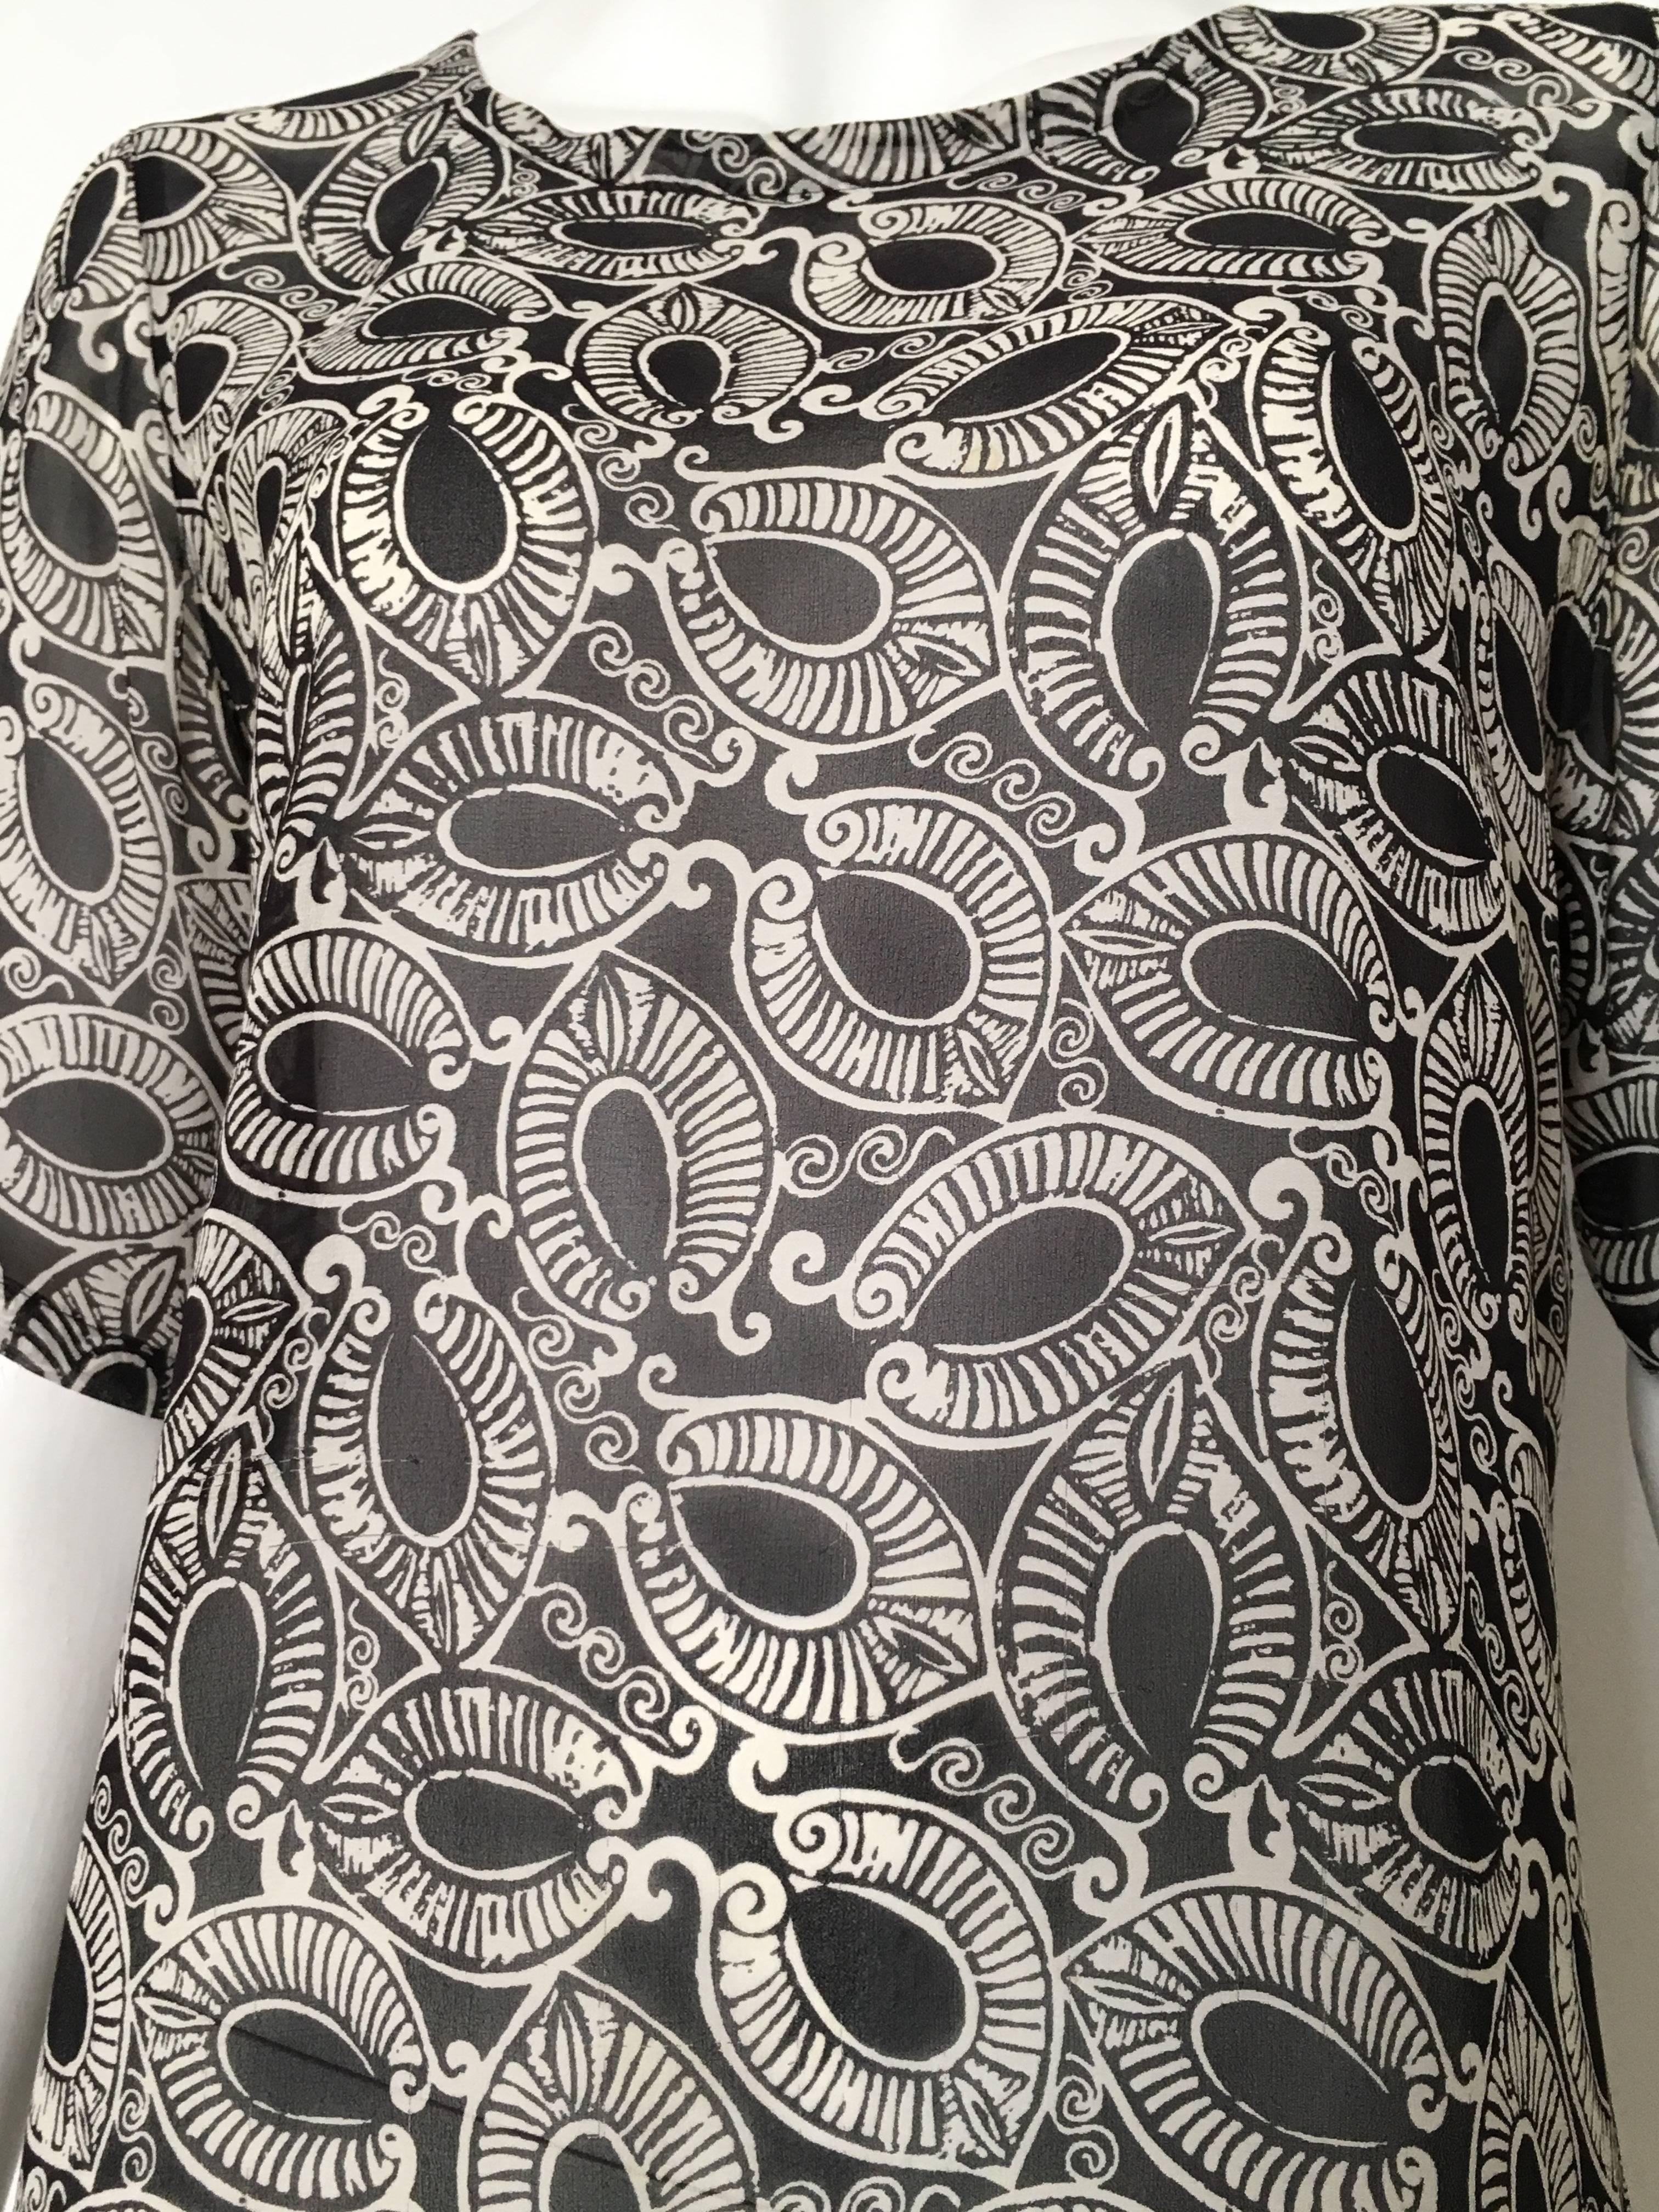 Valentino Miss V 1980s silk black & white print sheer blouse is a size 4 and an Italian size 38. There are 3 buttons on the back of neck and a replacement button inside blouse. Match this with your vintage Claude Montana pants and your Dior